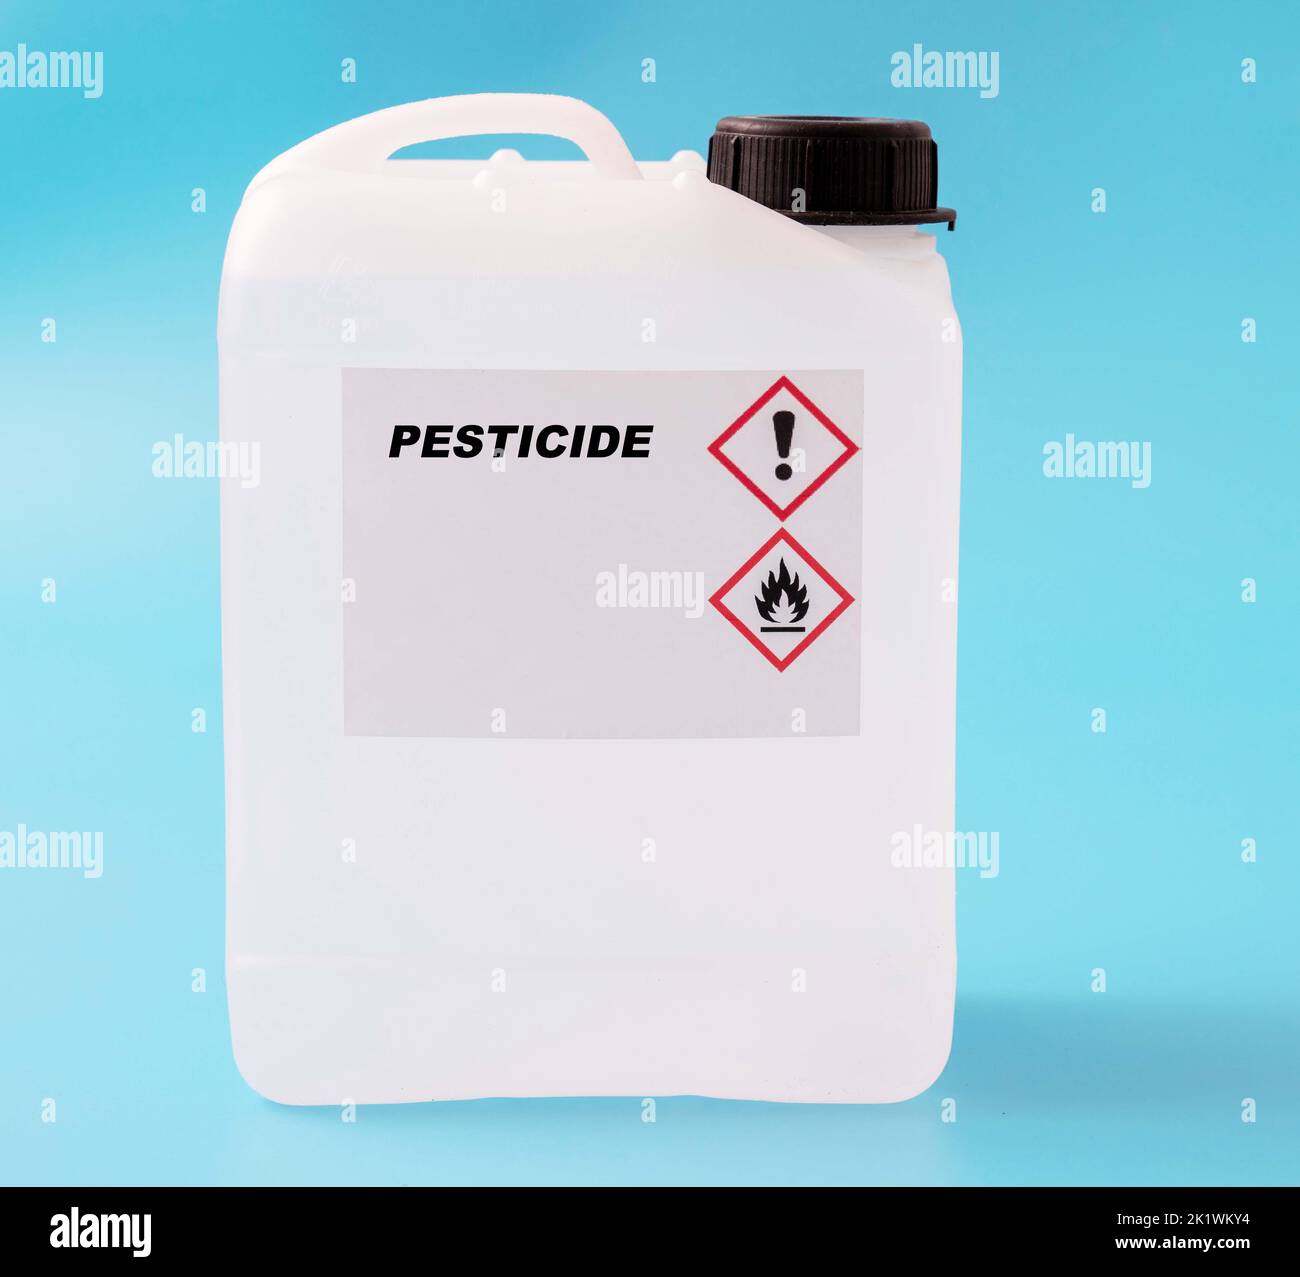 Pesticide in a plastic canister, conceptual image Stock Photo